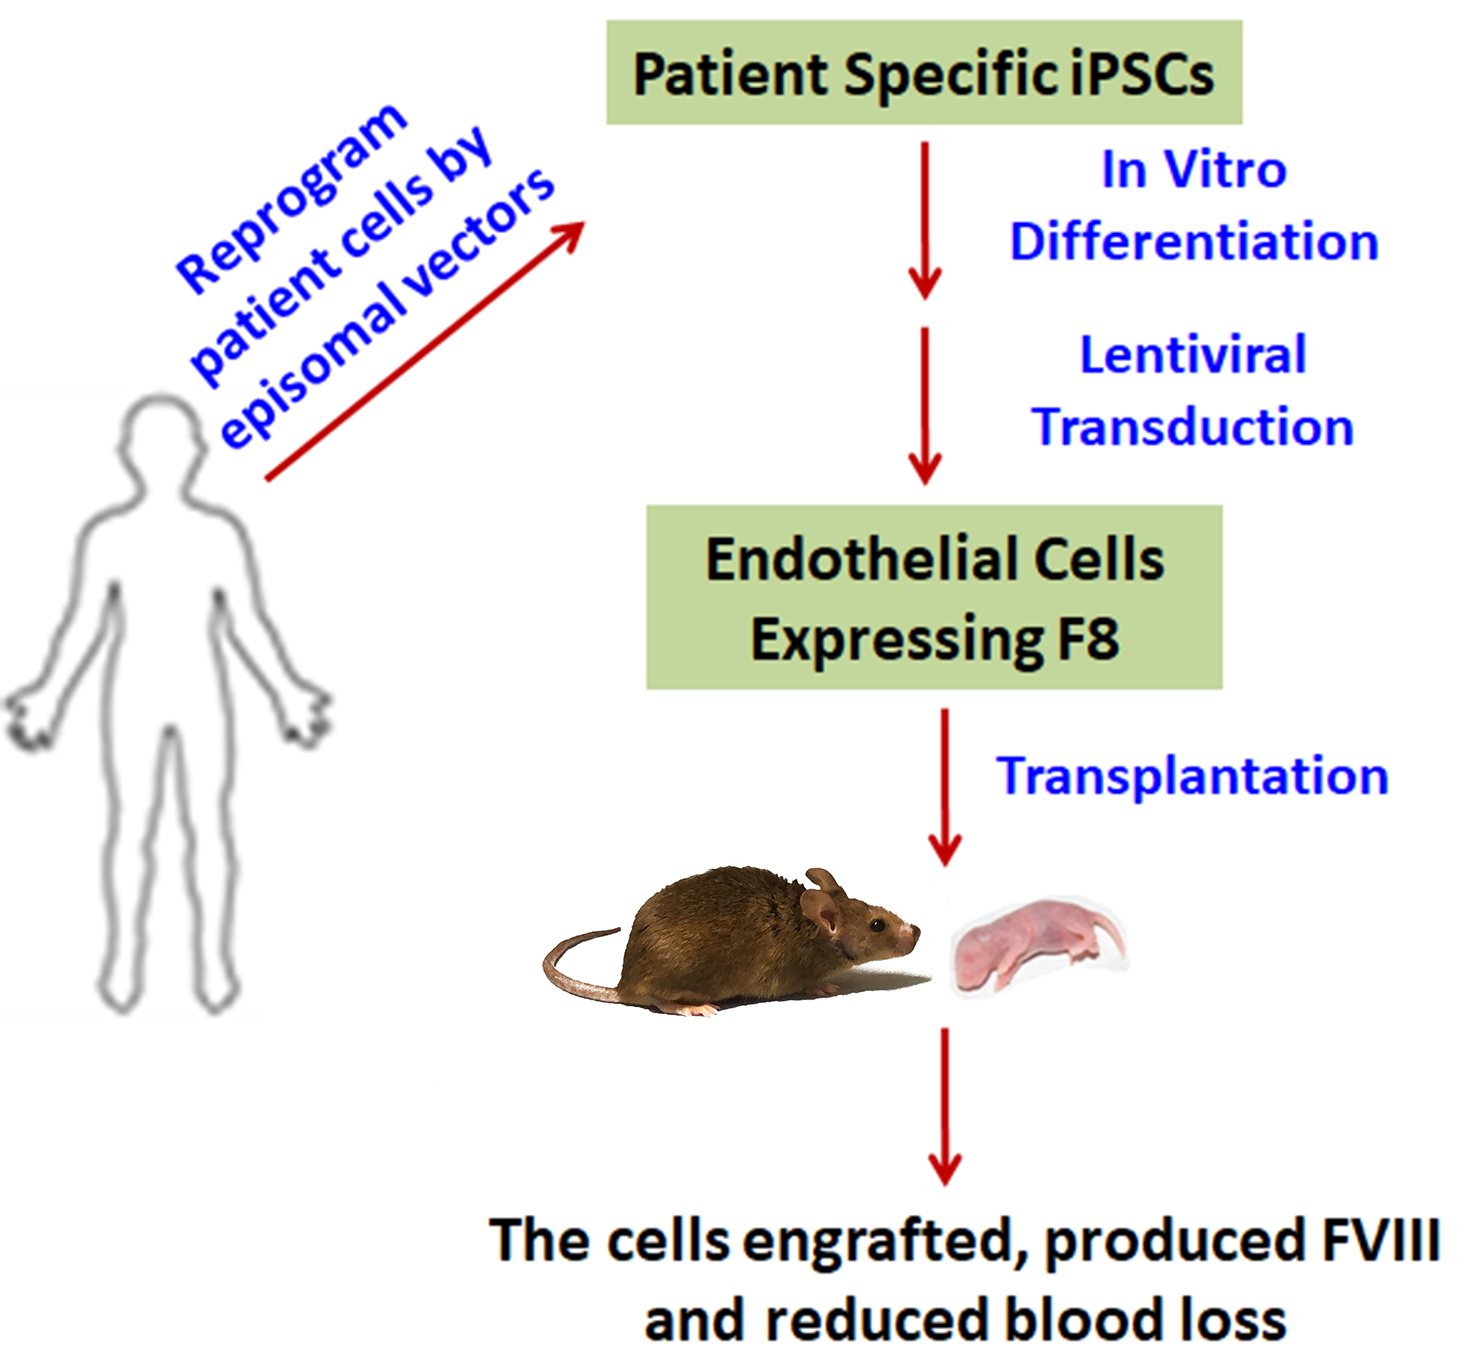 Induced Pluripotent Stem Cells Show Success in Treating Hemophilia A in Mice